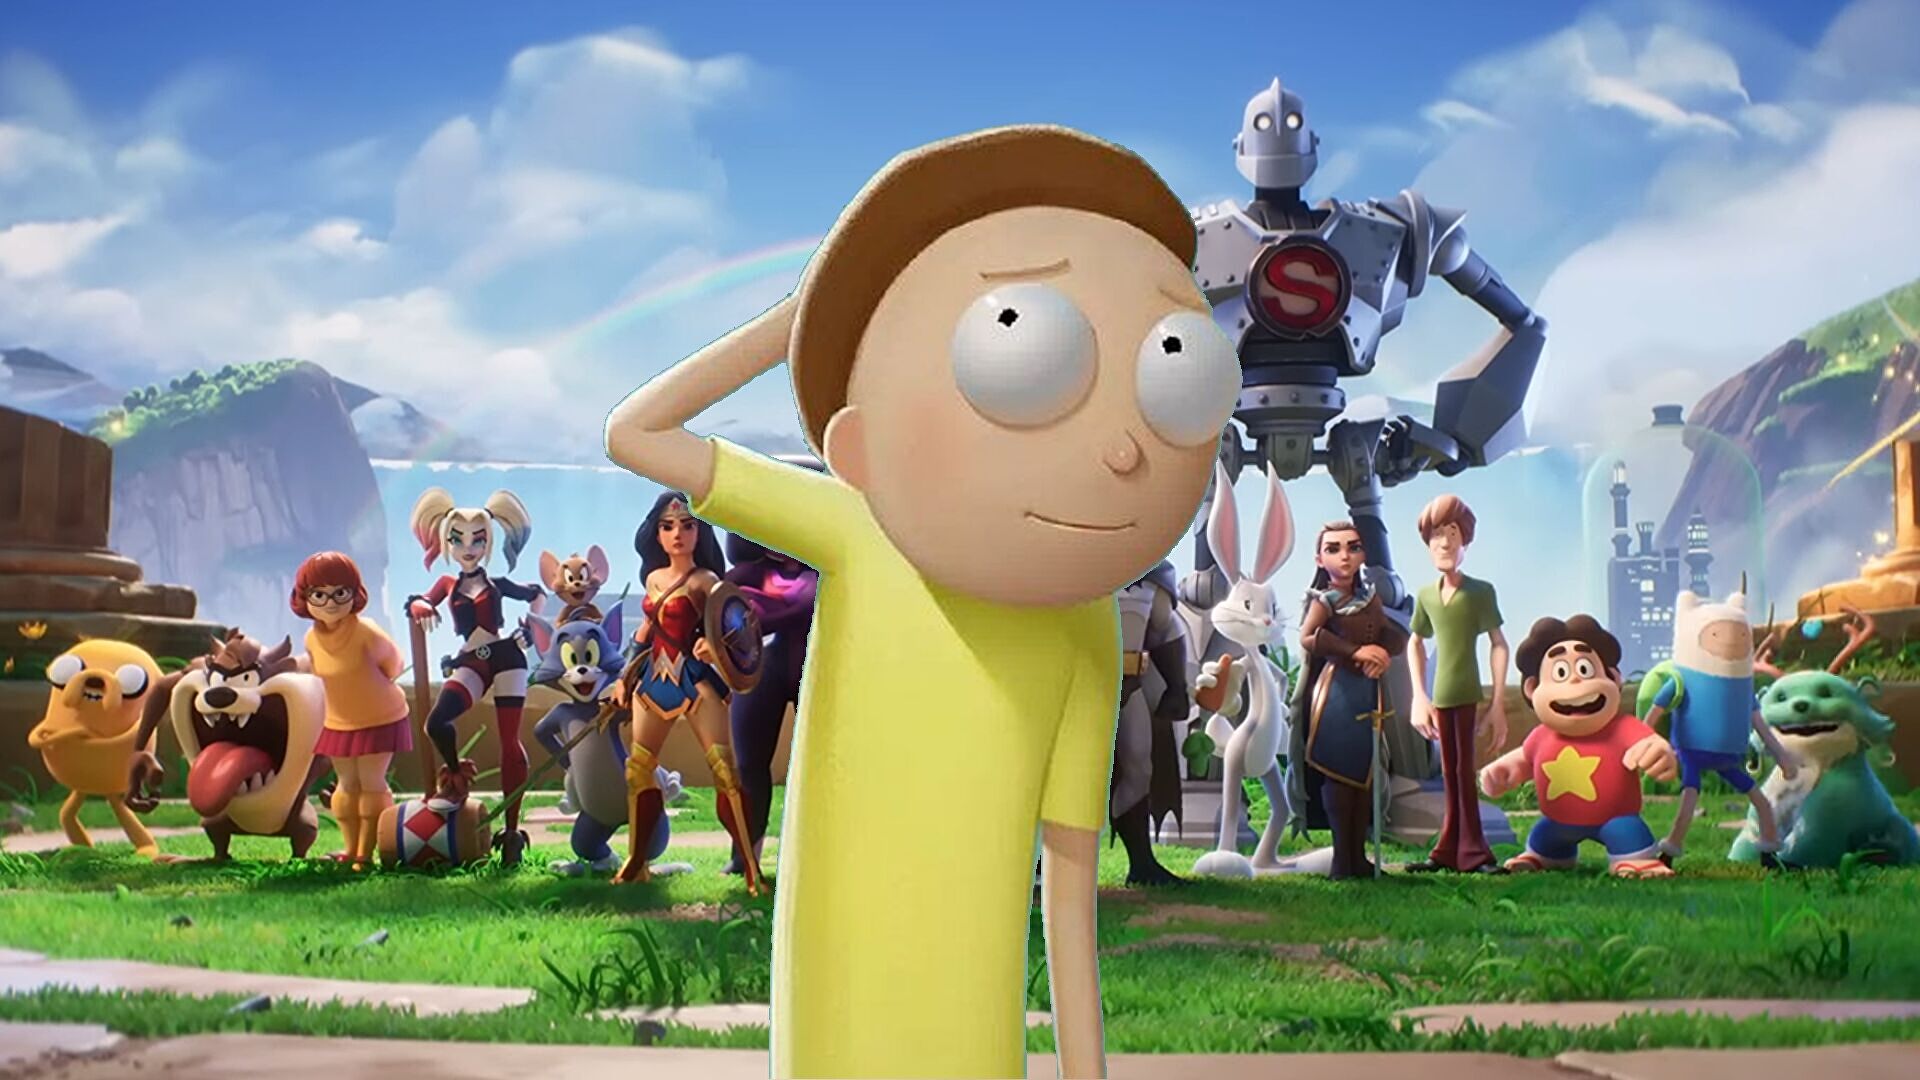 A Rick-less Morty teleports into MultiVersus today